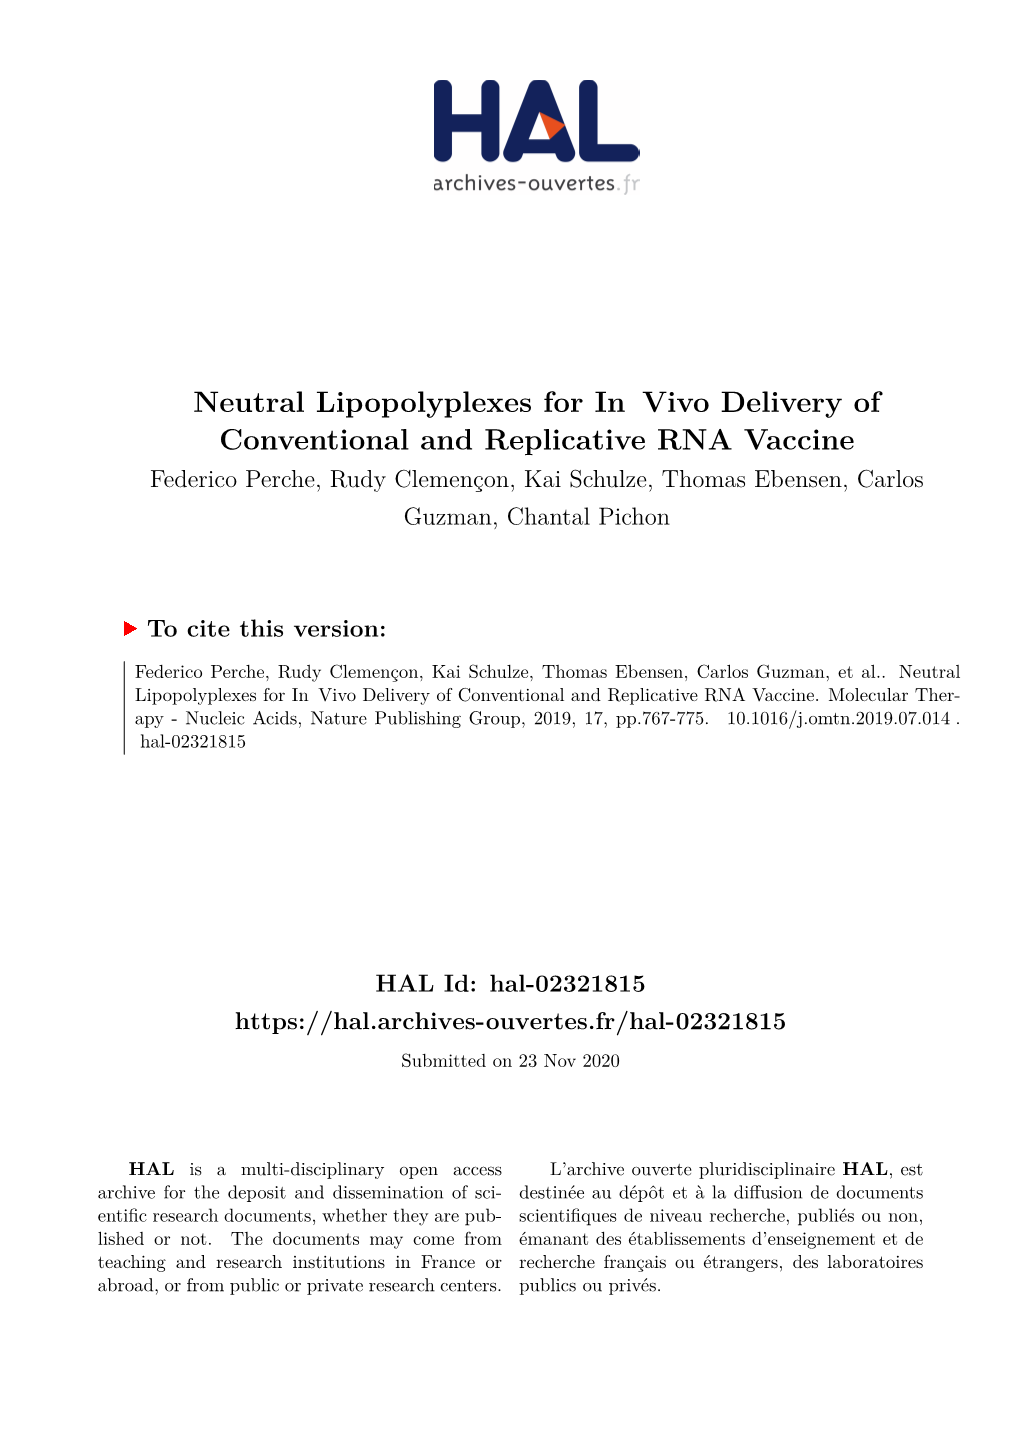 Neutral Lipopolyplexes for in Vivo Delivery of Conventional And